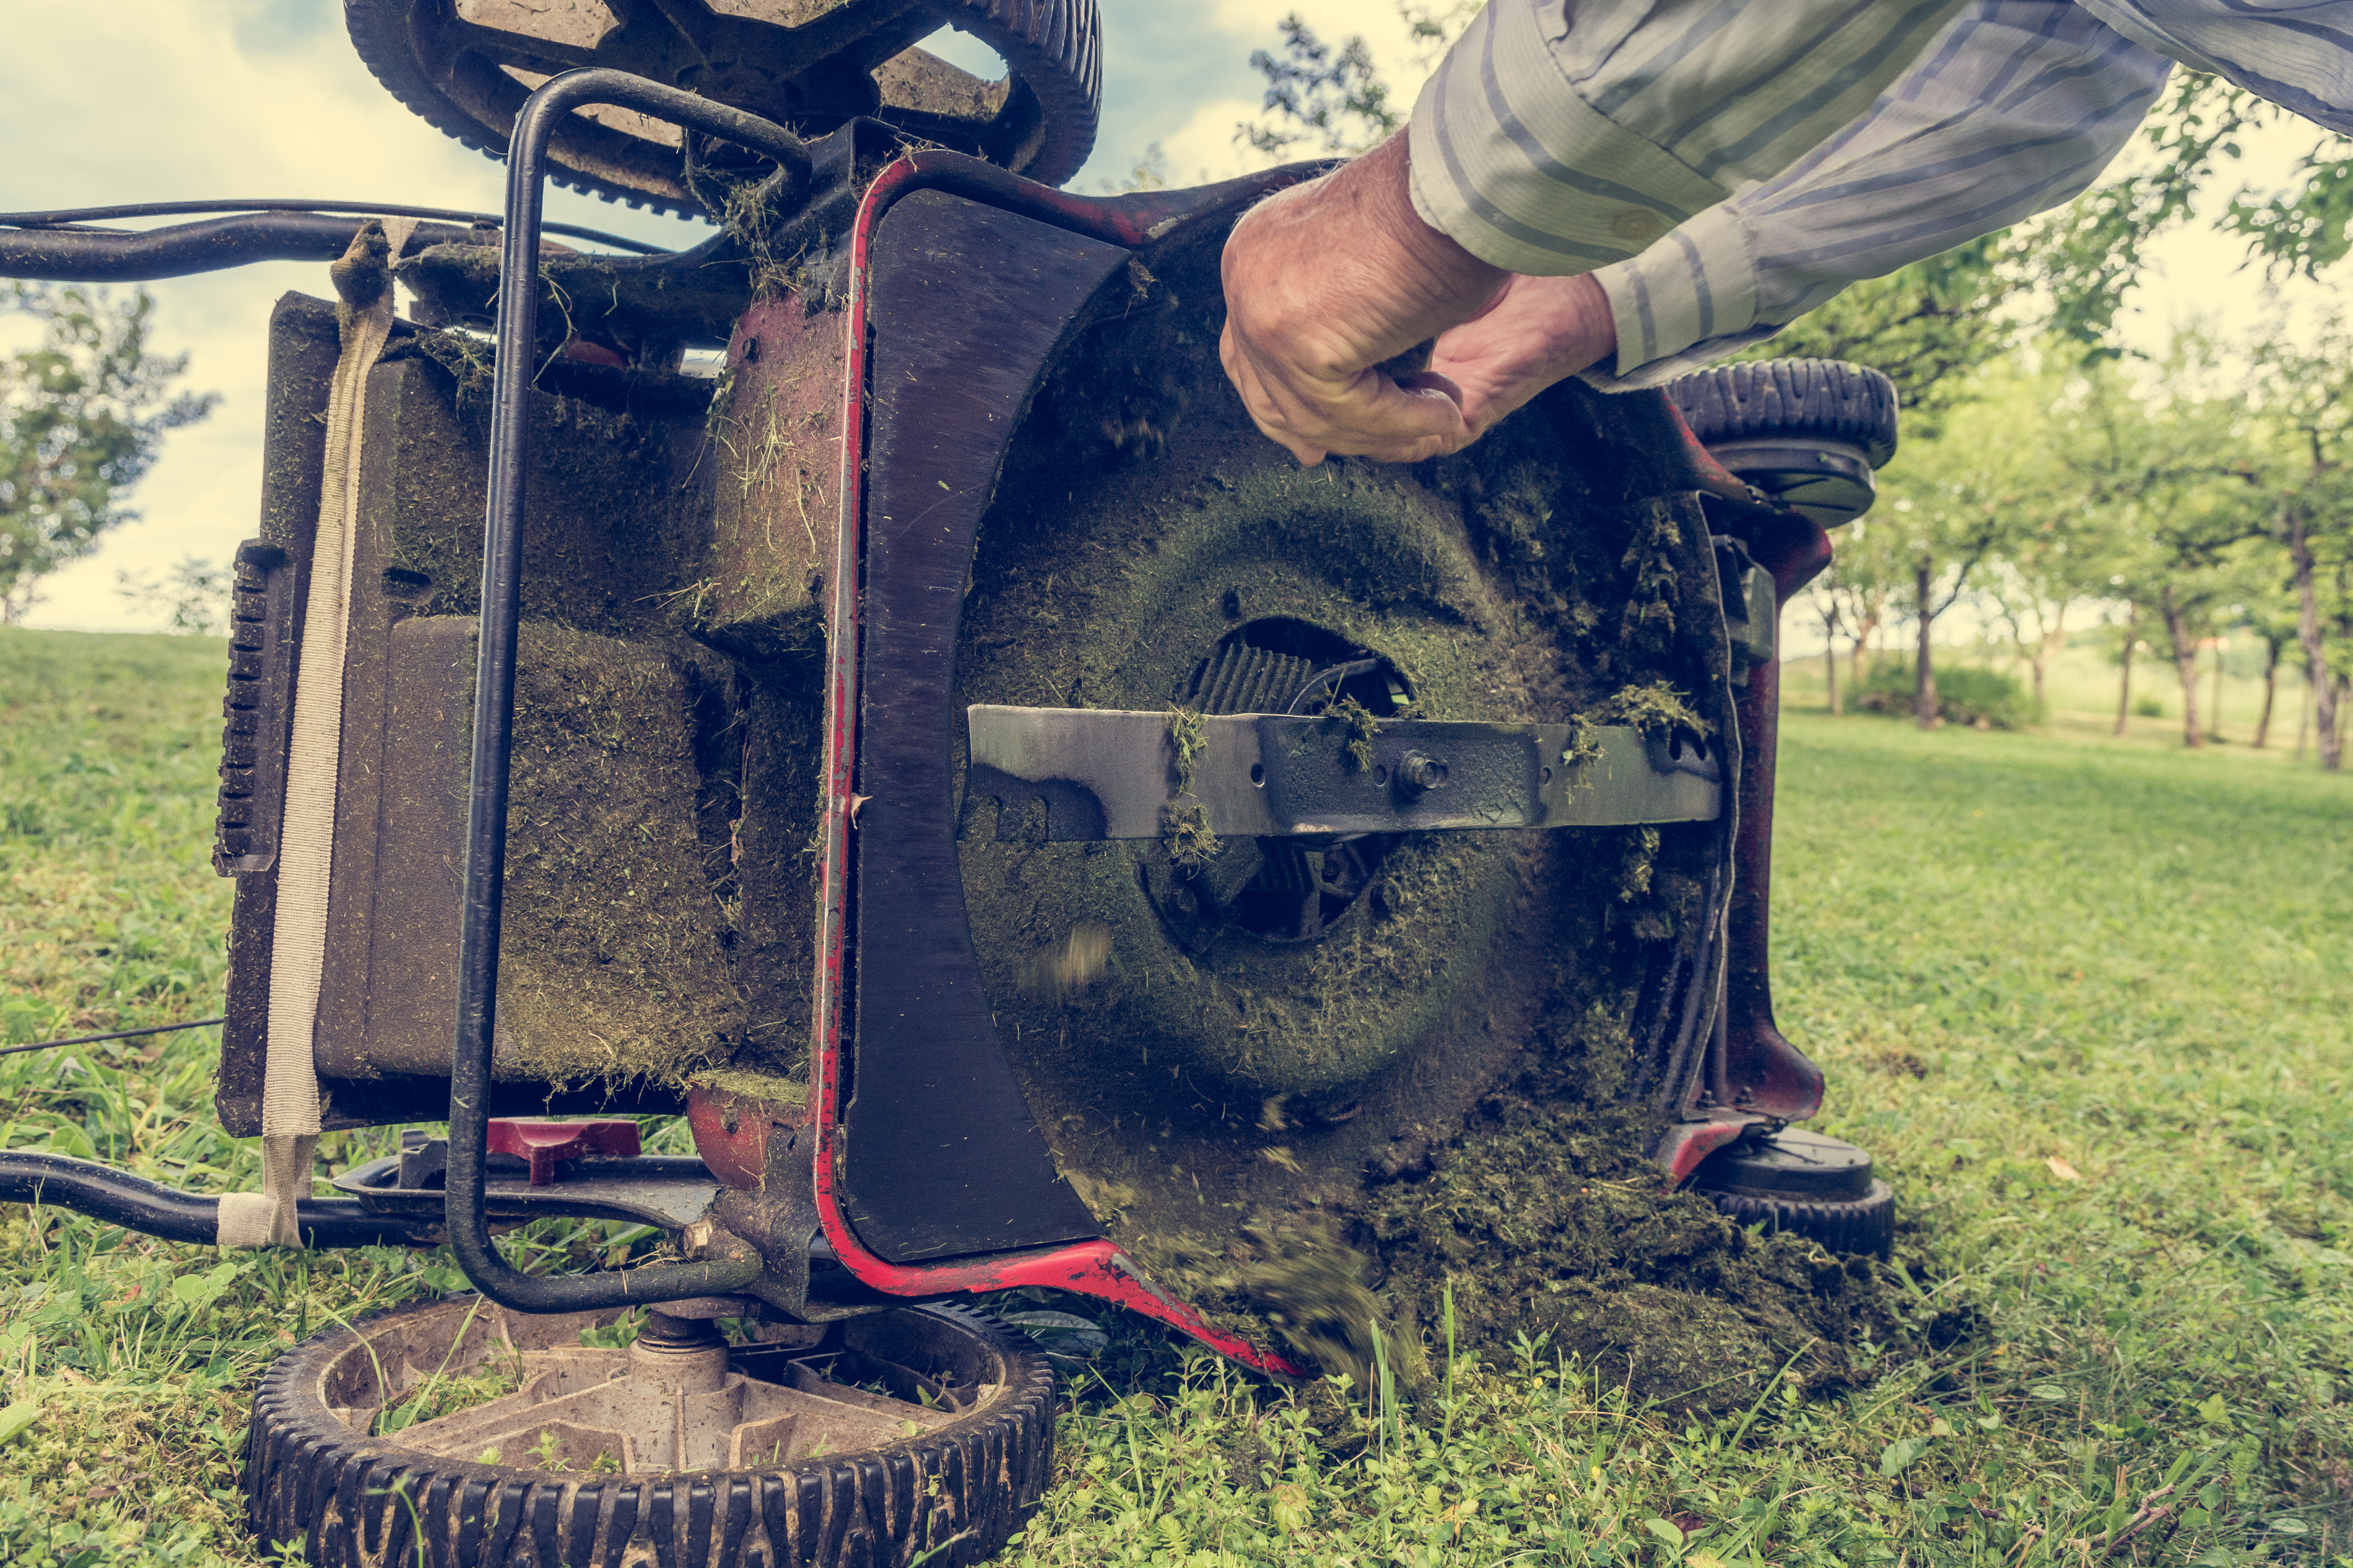 Overview of Basic Mower Maintenance